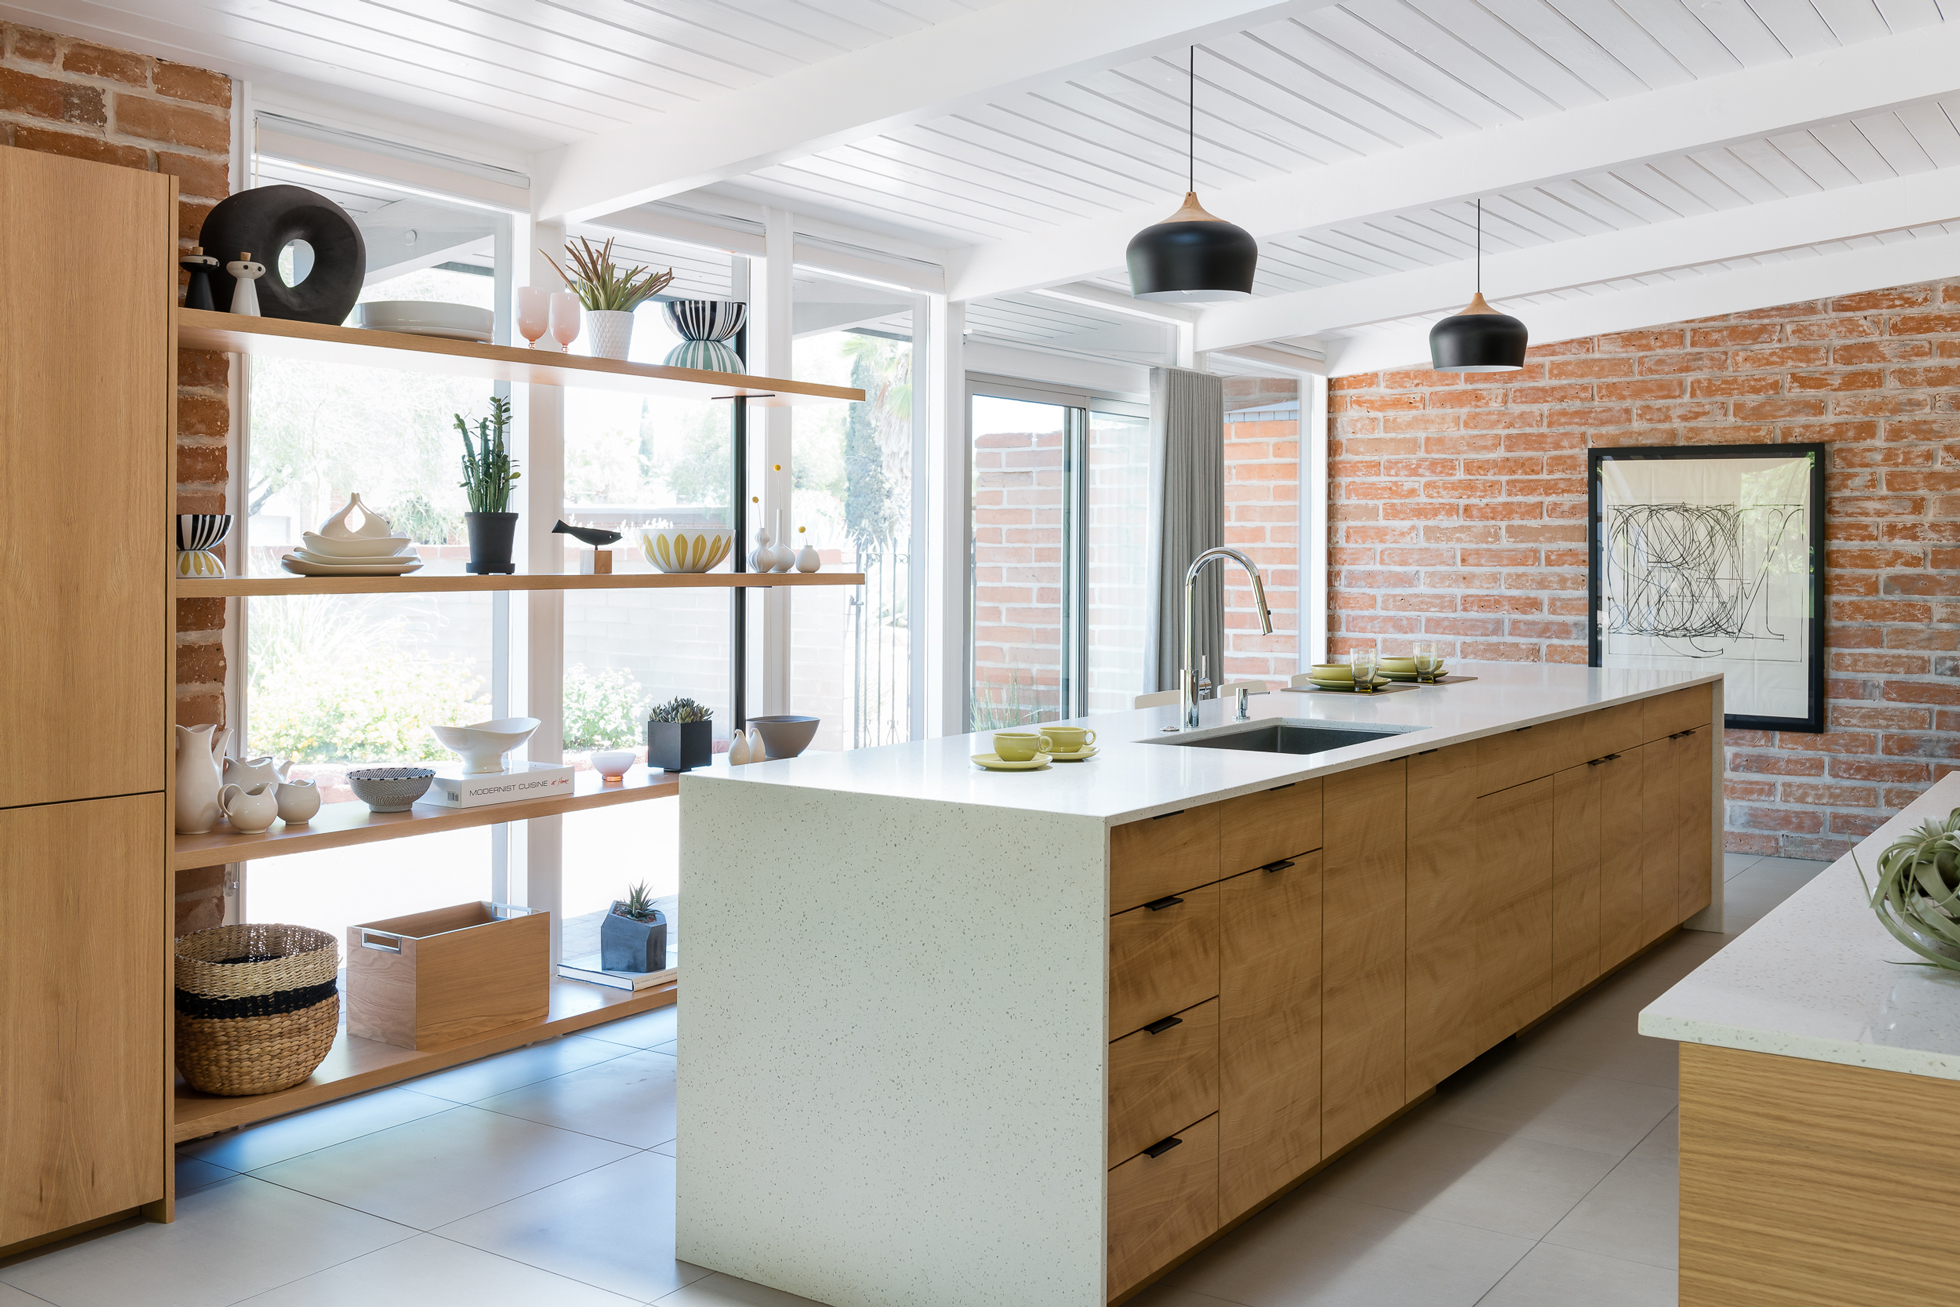 A bright kitchen with open shelving and wall of windows